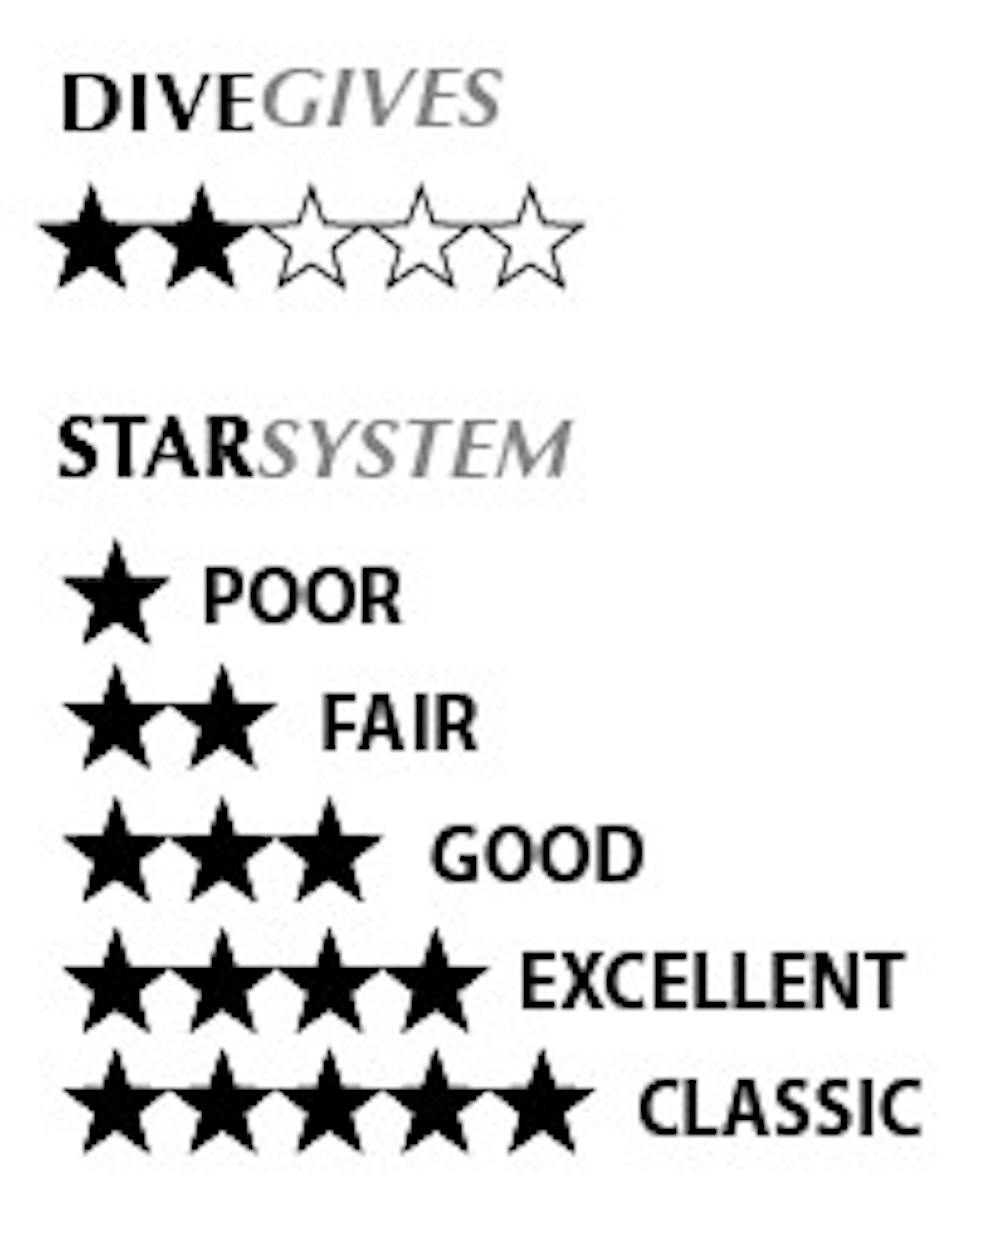 Dive gives 2 of 5 stars